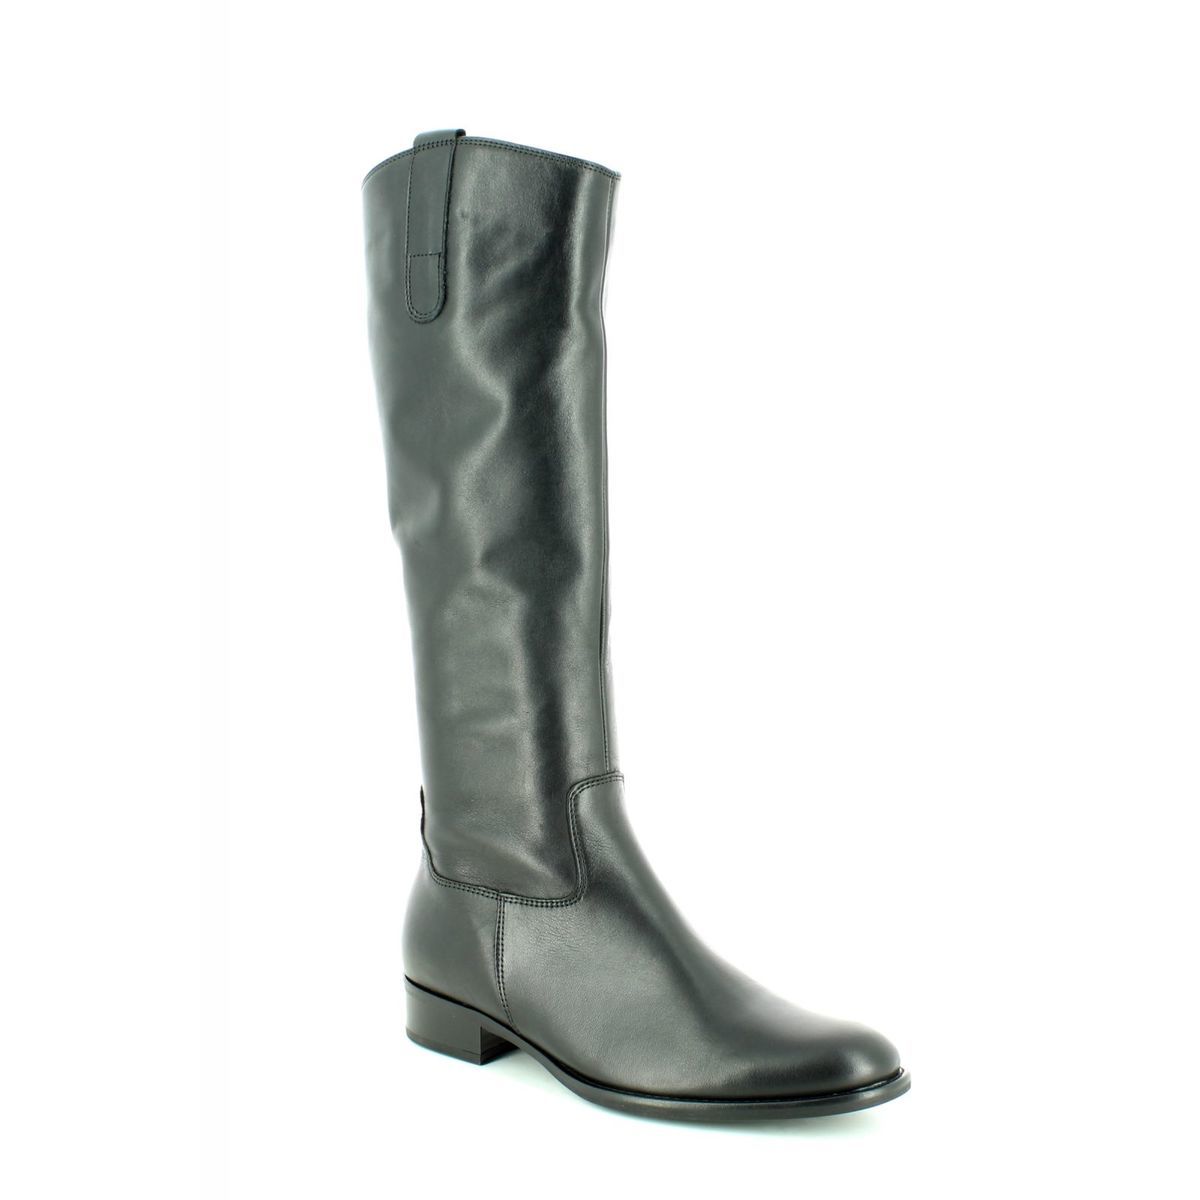 gabor knee high boots sale